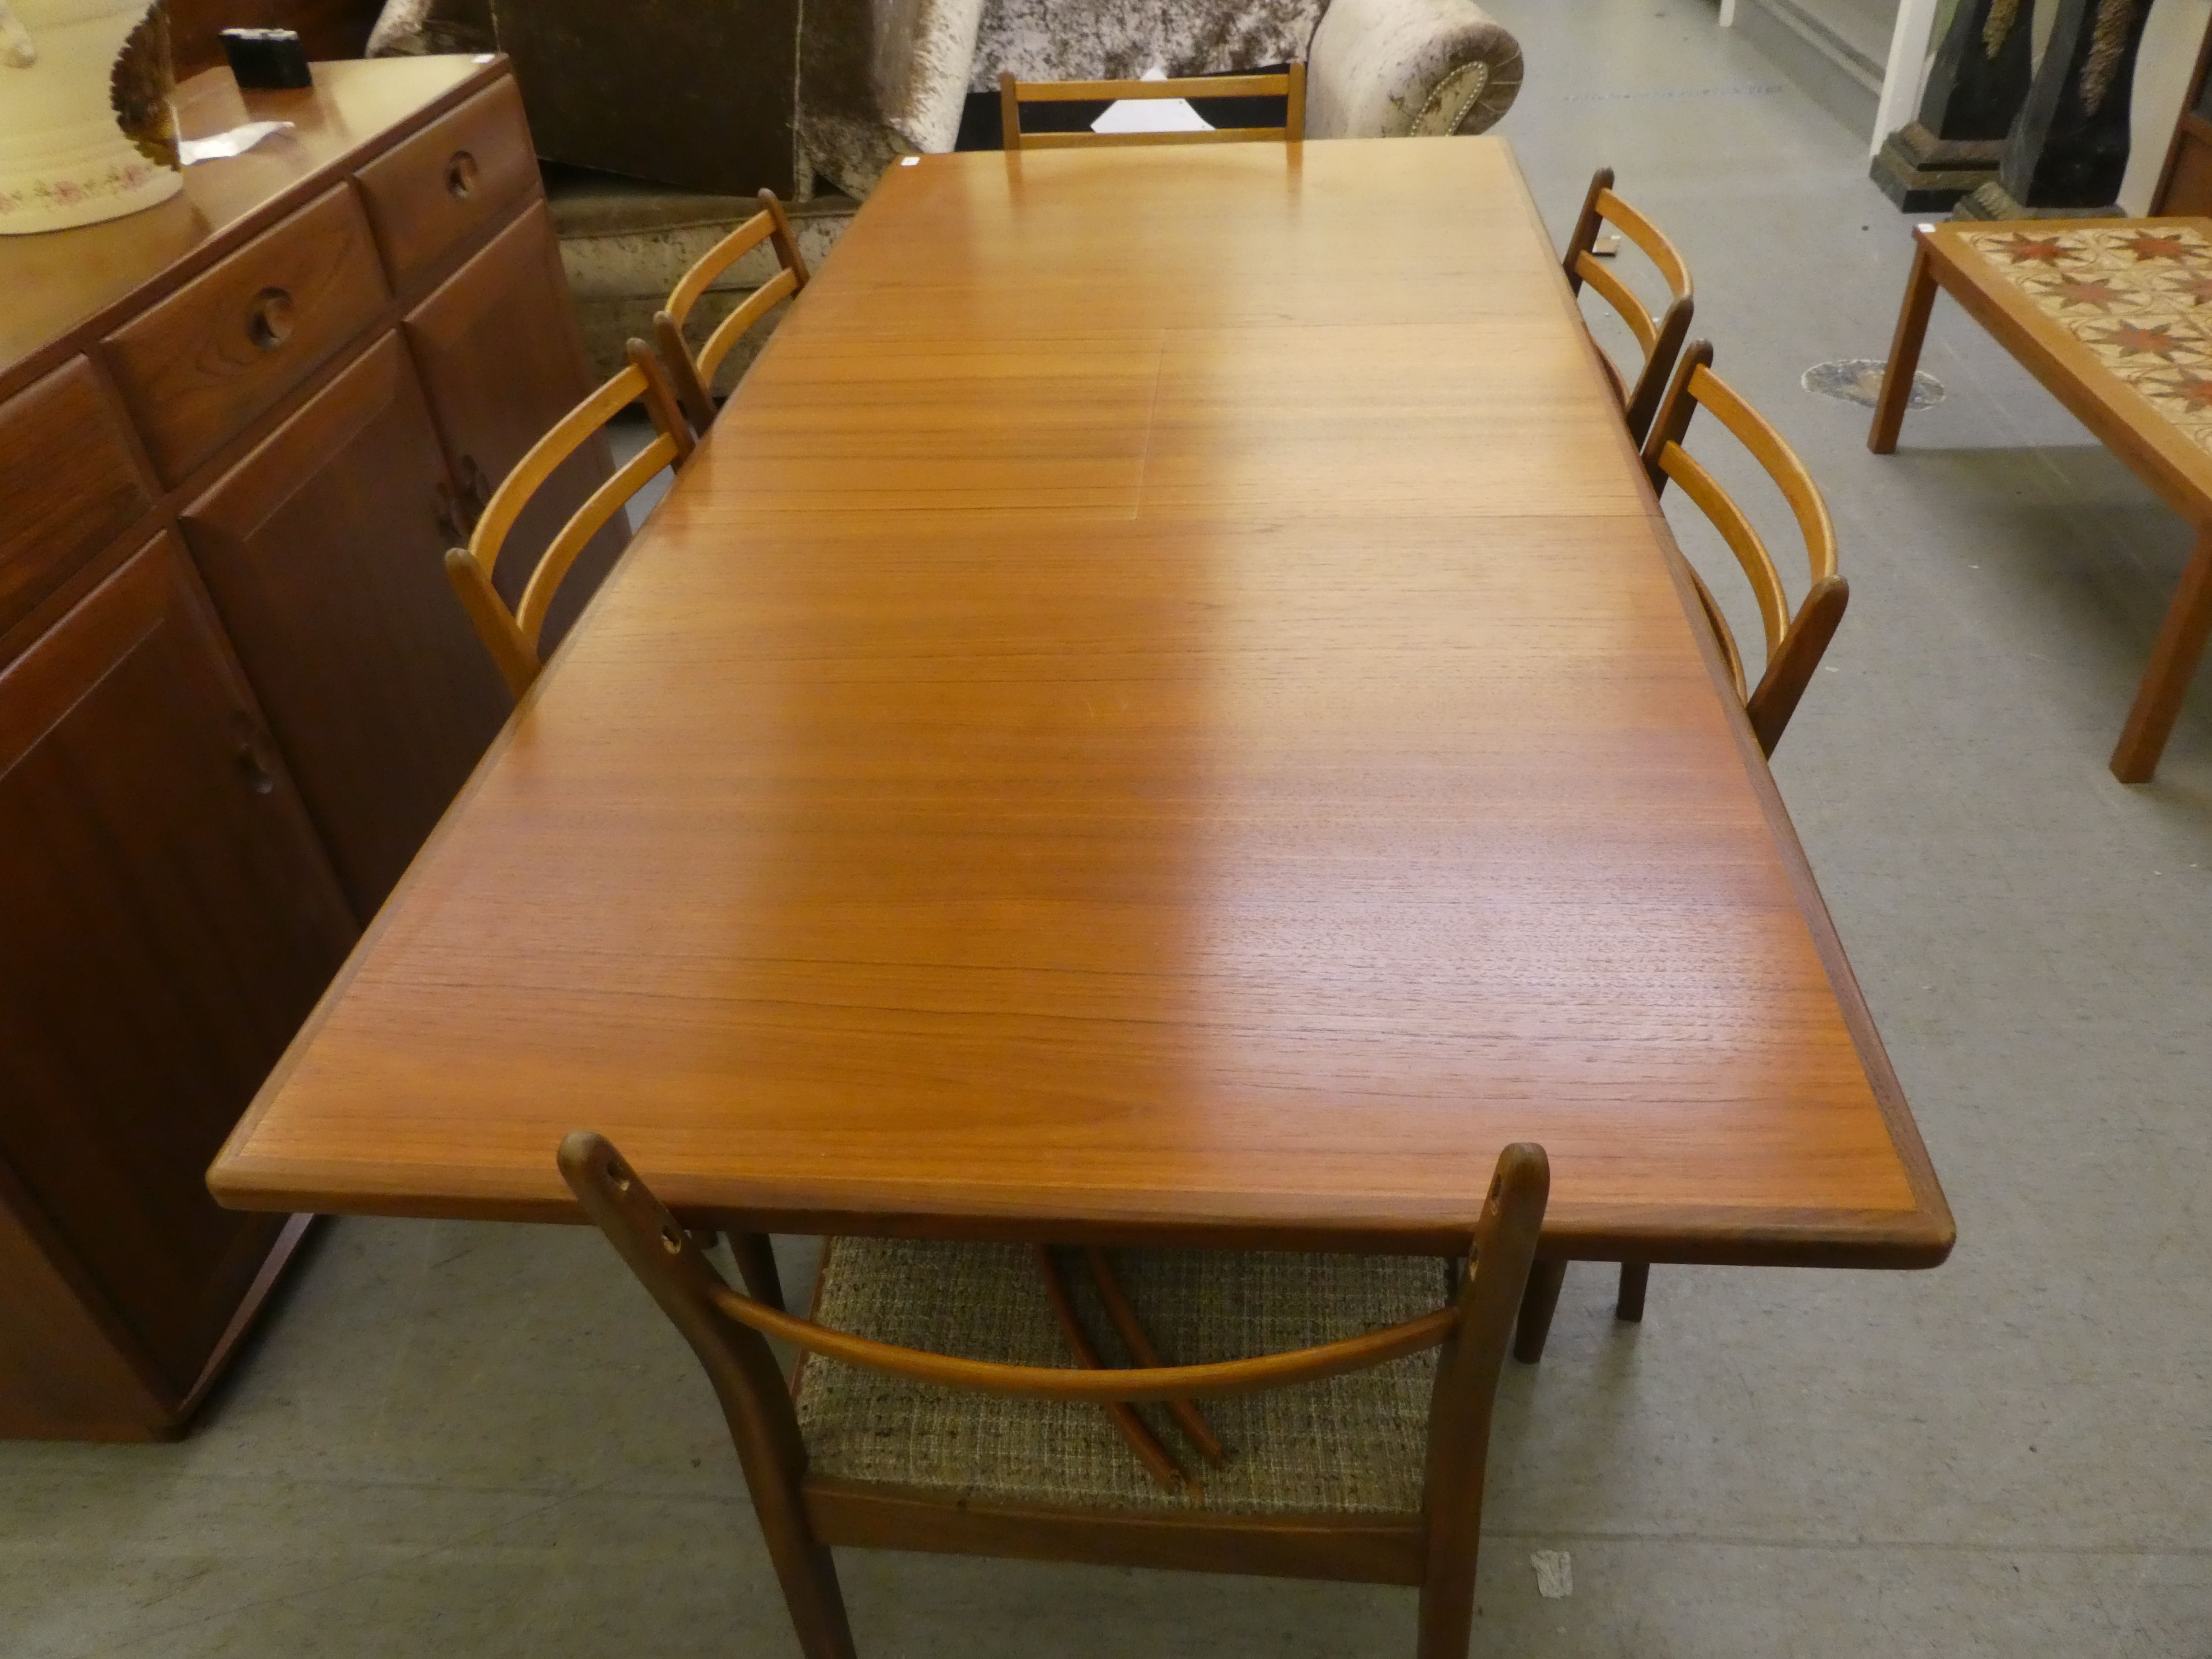 A 1970s teak G-Plan dining table, raised on turned, tapered legs  29"h  62"L extending to 80"L - Image 8 of 8